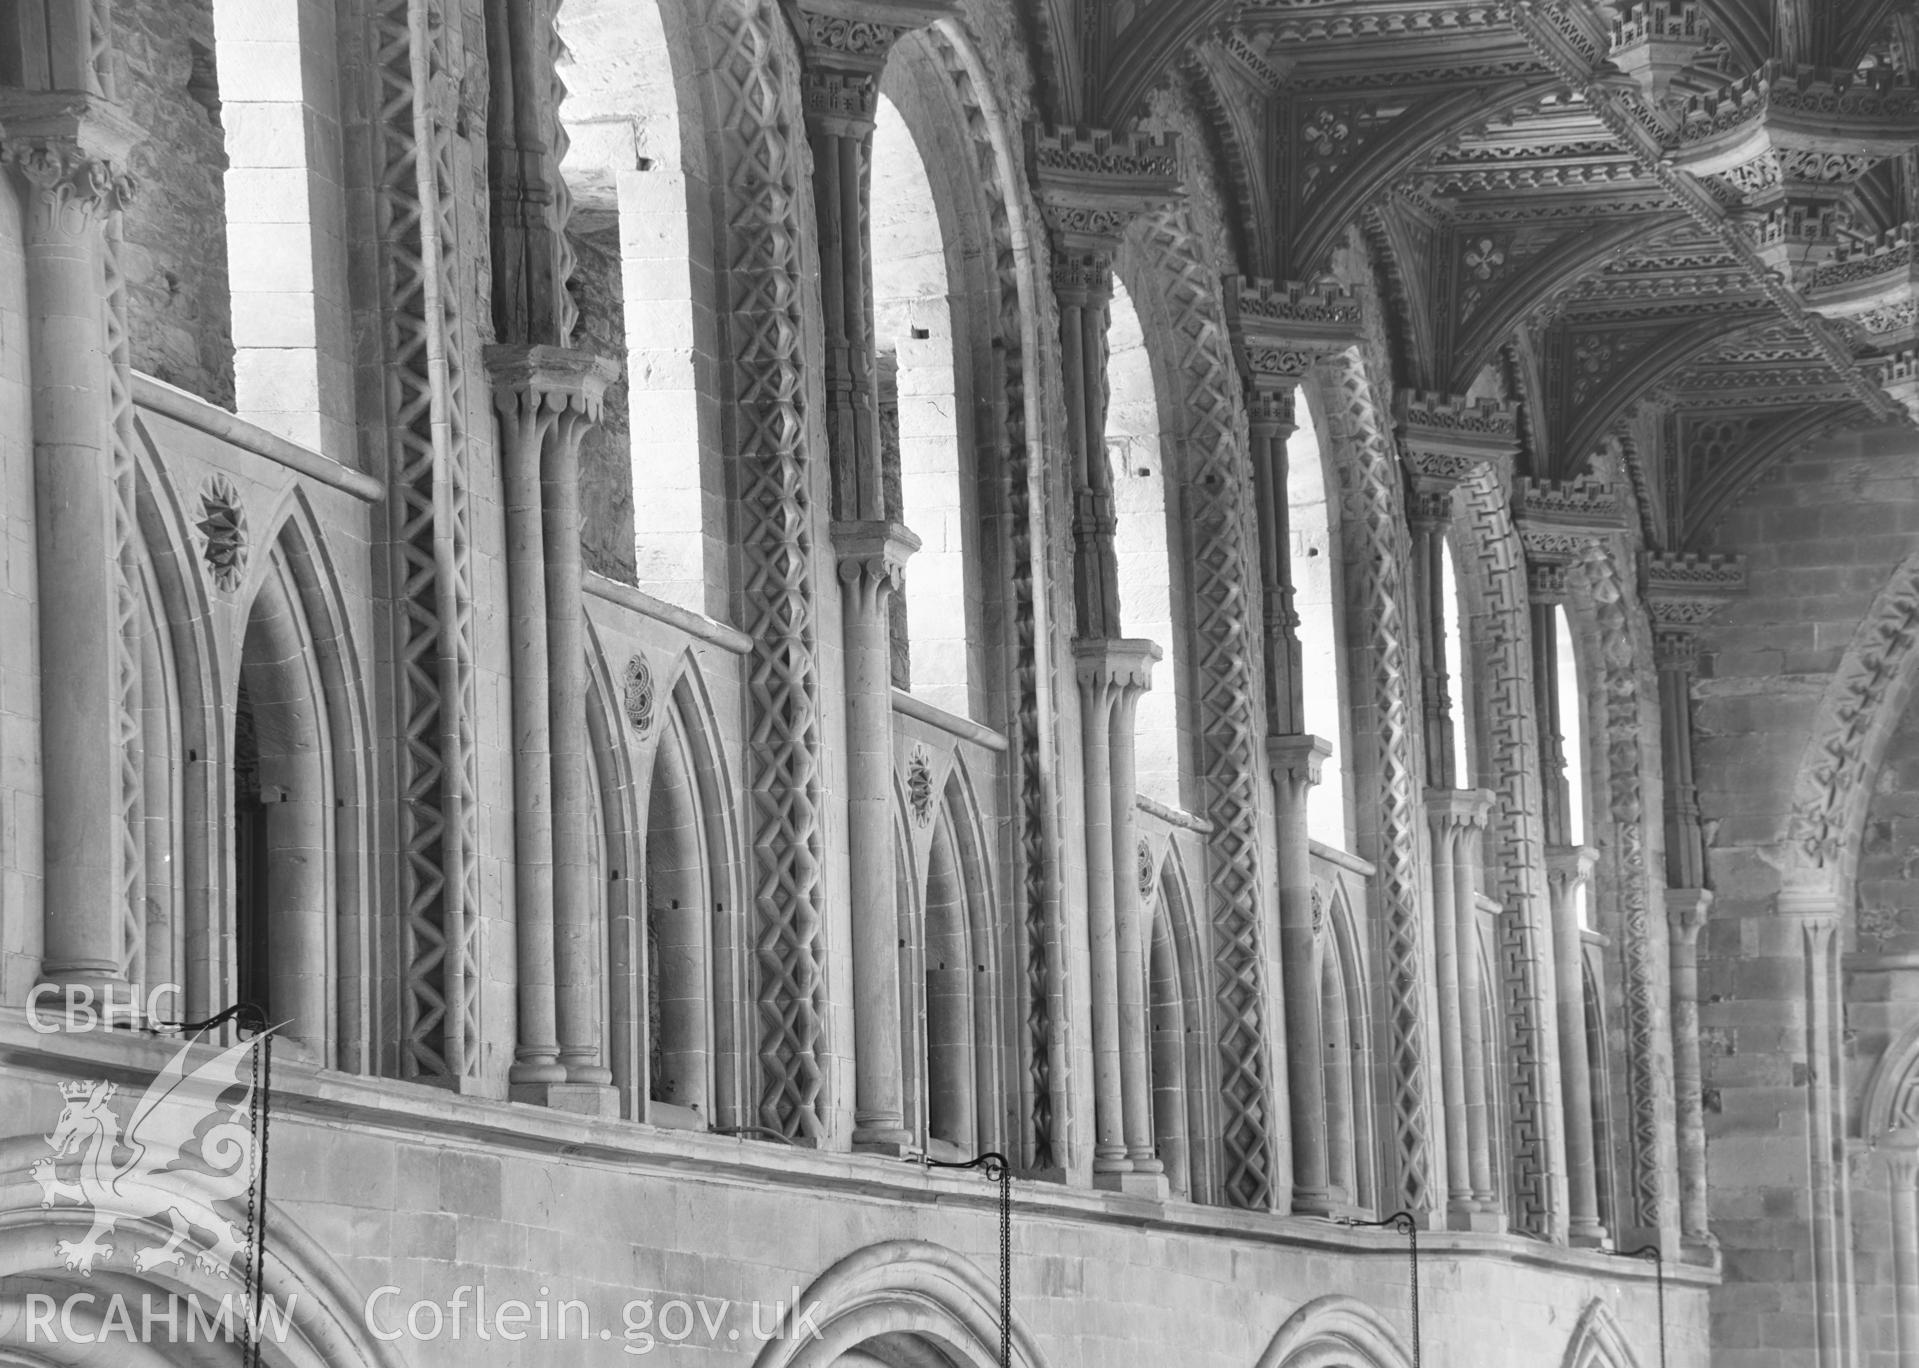 Digital copy of a black and white nitrate negative showing detailed interior view of decorated window arches at St. David's Cathedral, taken by E.W. Lovegrove, July 1936.